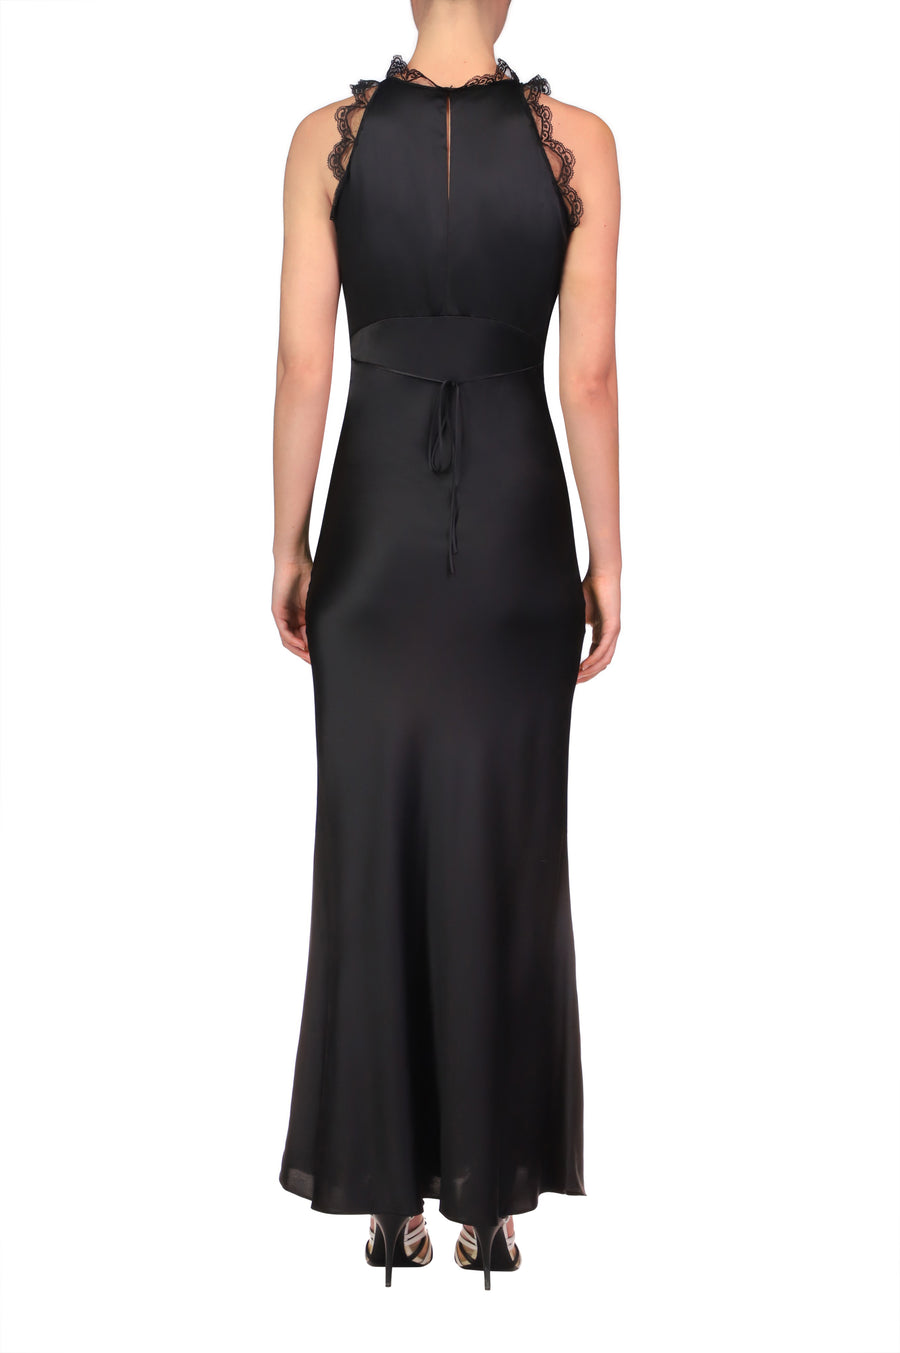 Black Silk Satin Bias Halter Dress With Lace And Ruffle Details